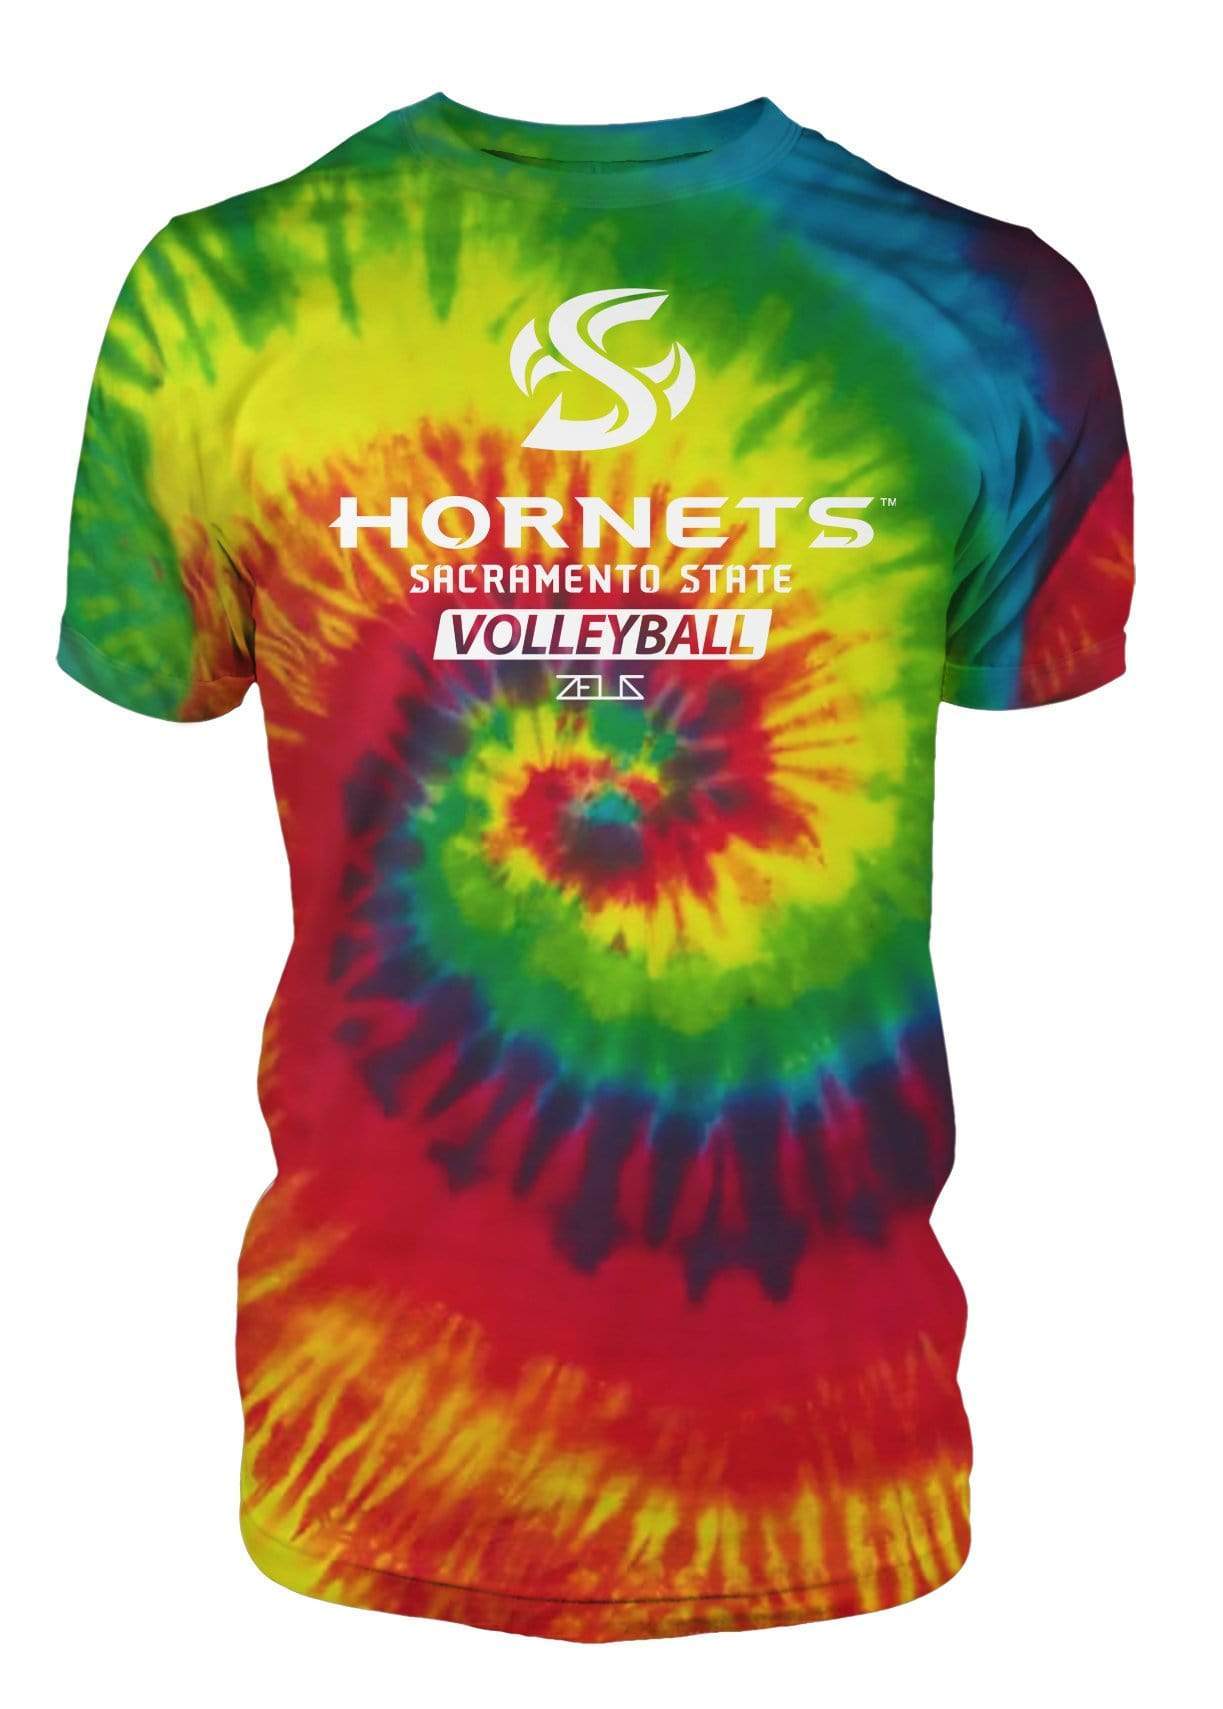 Sacramento State Hornets Sac State Volleyball Division I T-shirt by Zeus Collegiate